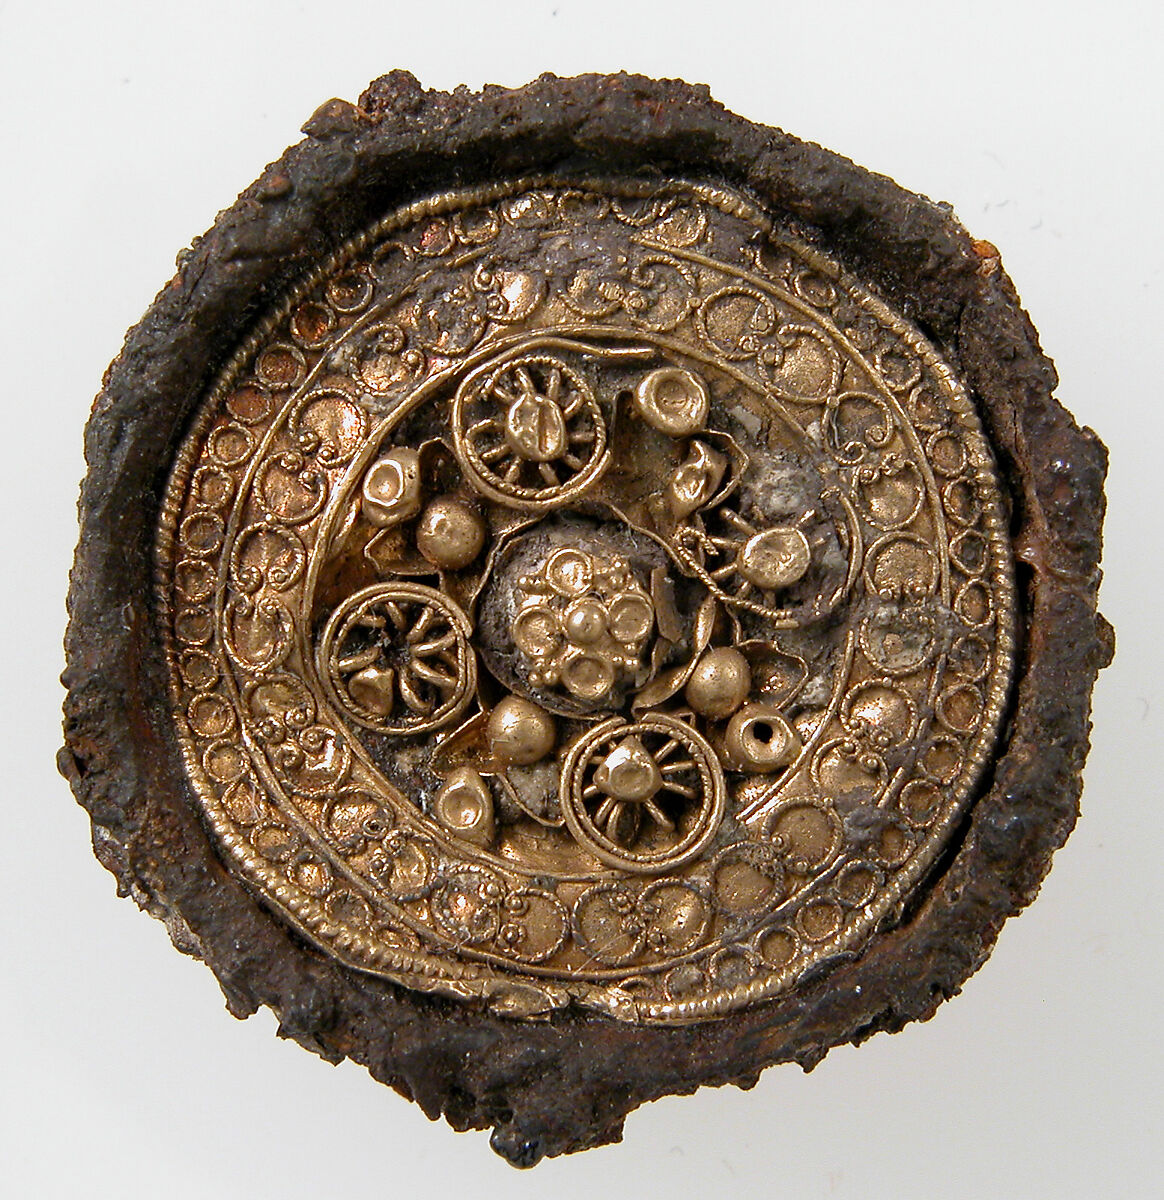 Disk Brooch, Gold, wire, iron core, Frankish (?) 